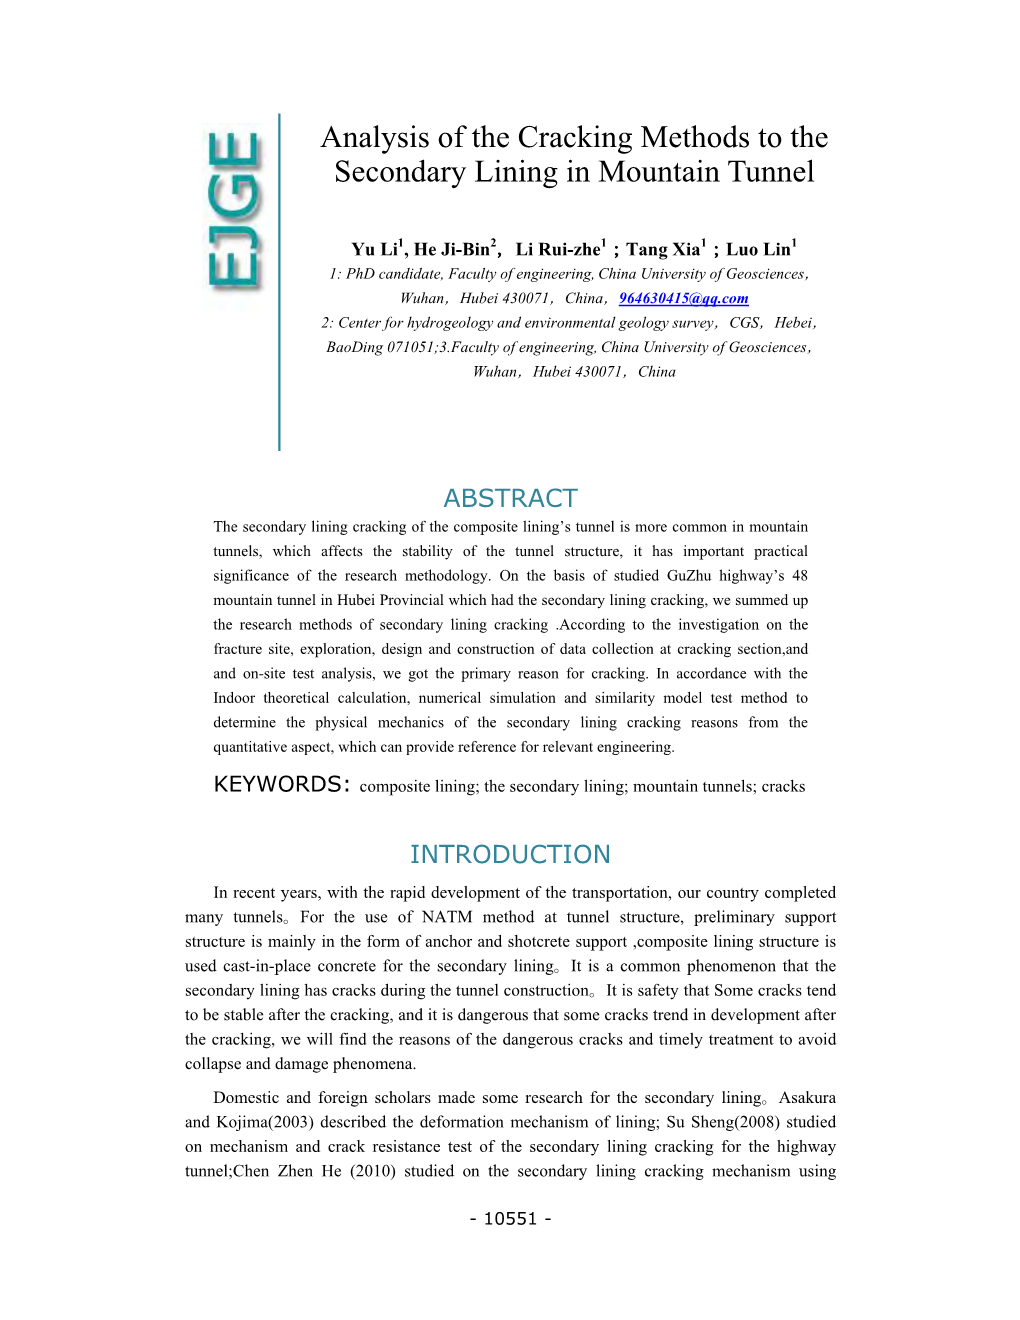 Analysis of the Cracking Methods to the Secondary Lining in Mountain Tunnel